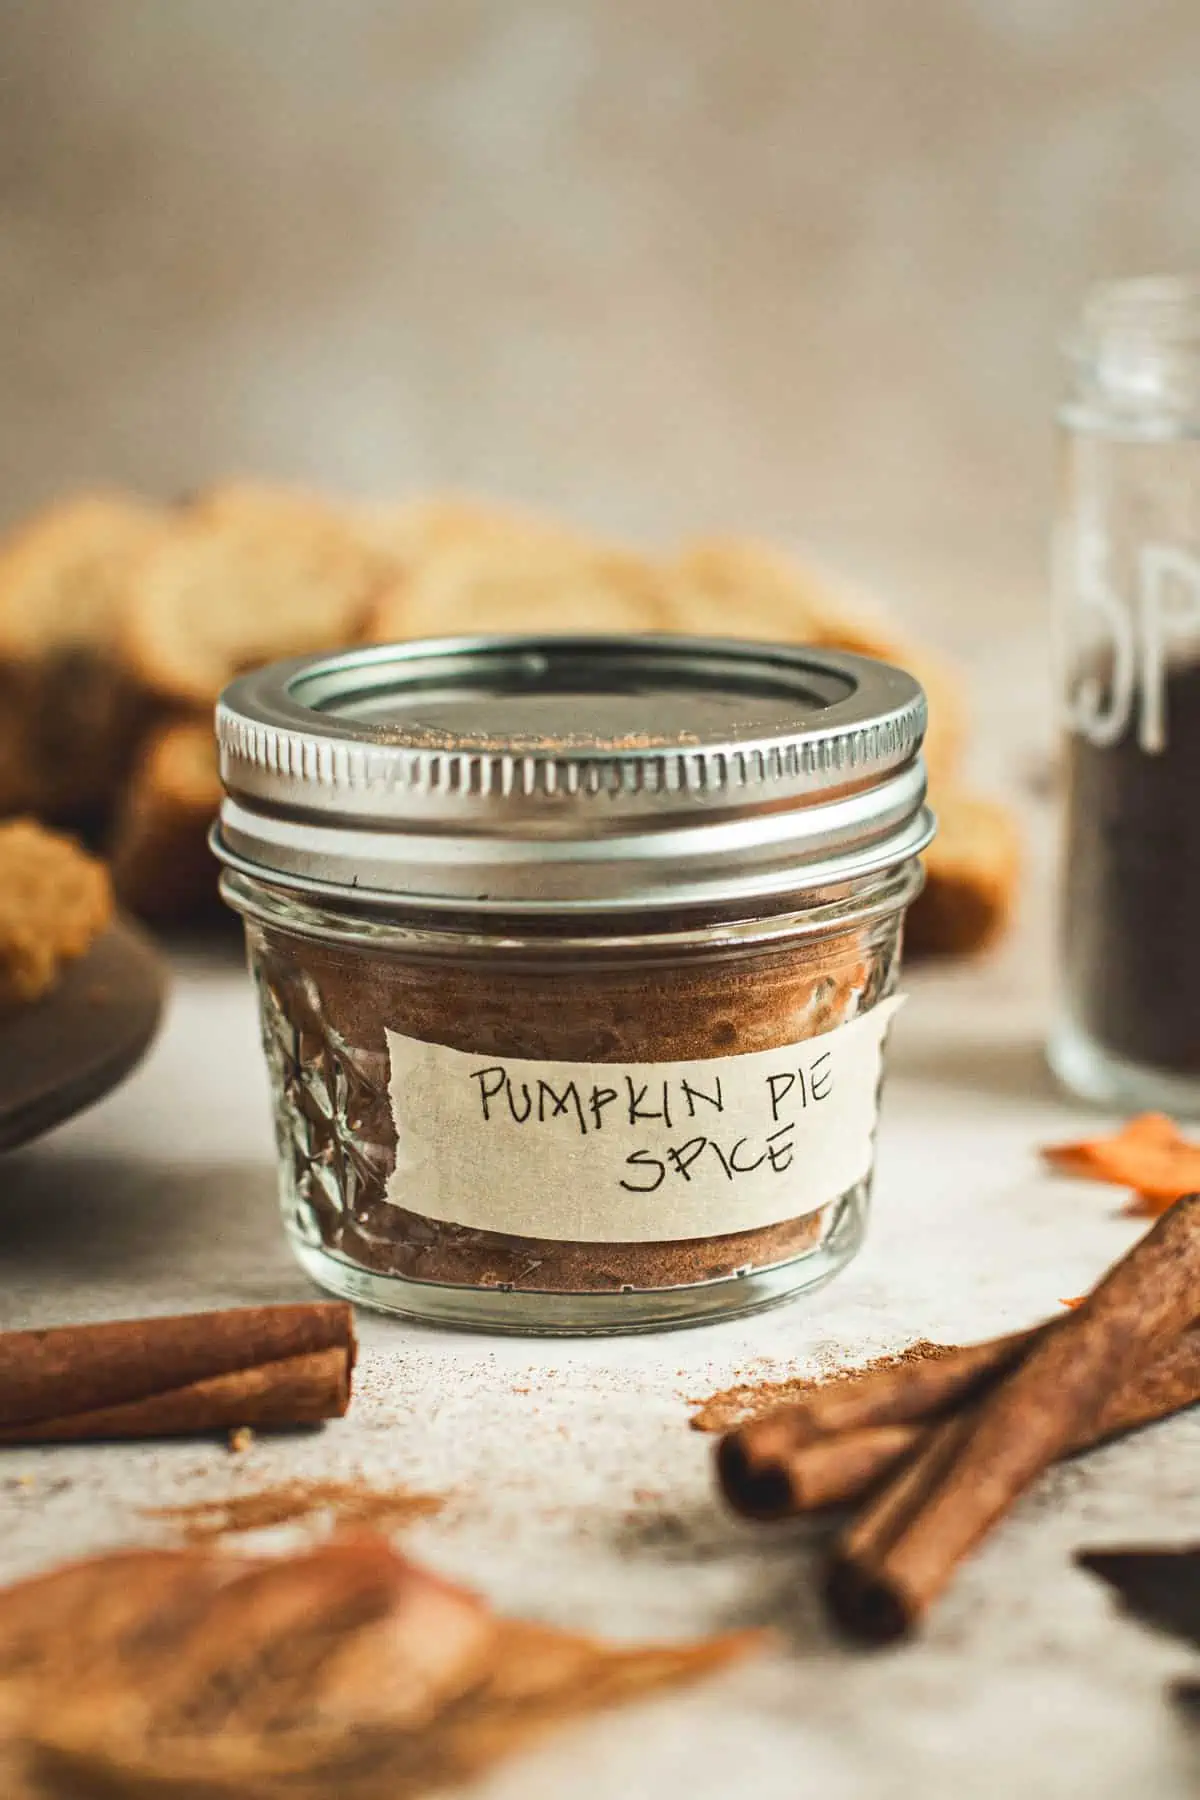 Pumpkin pie spice in a jar with a homemade label.